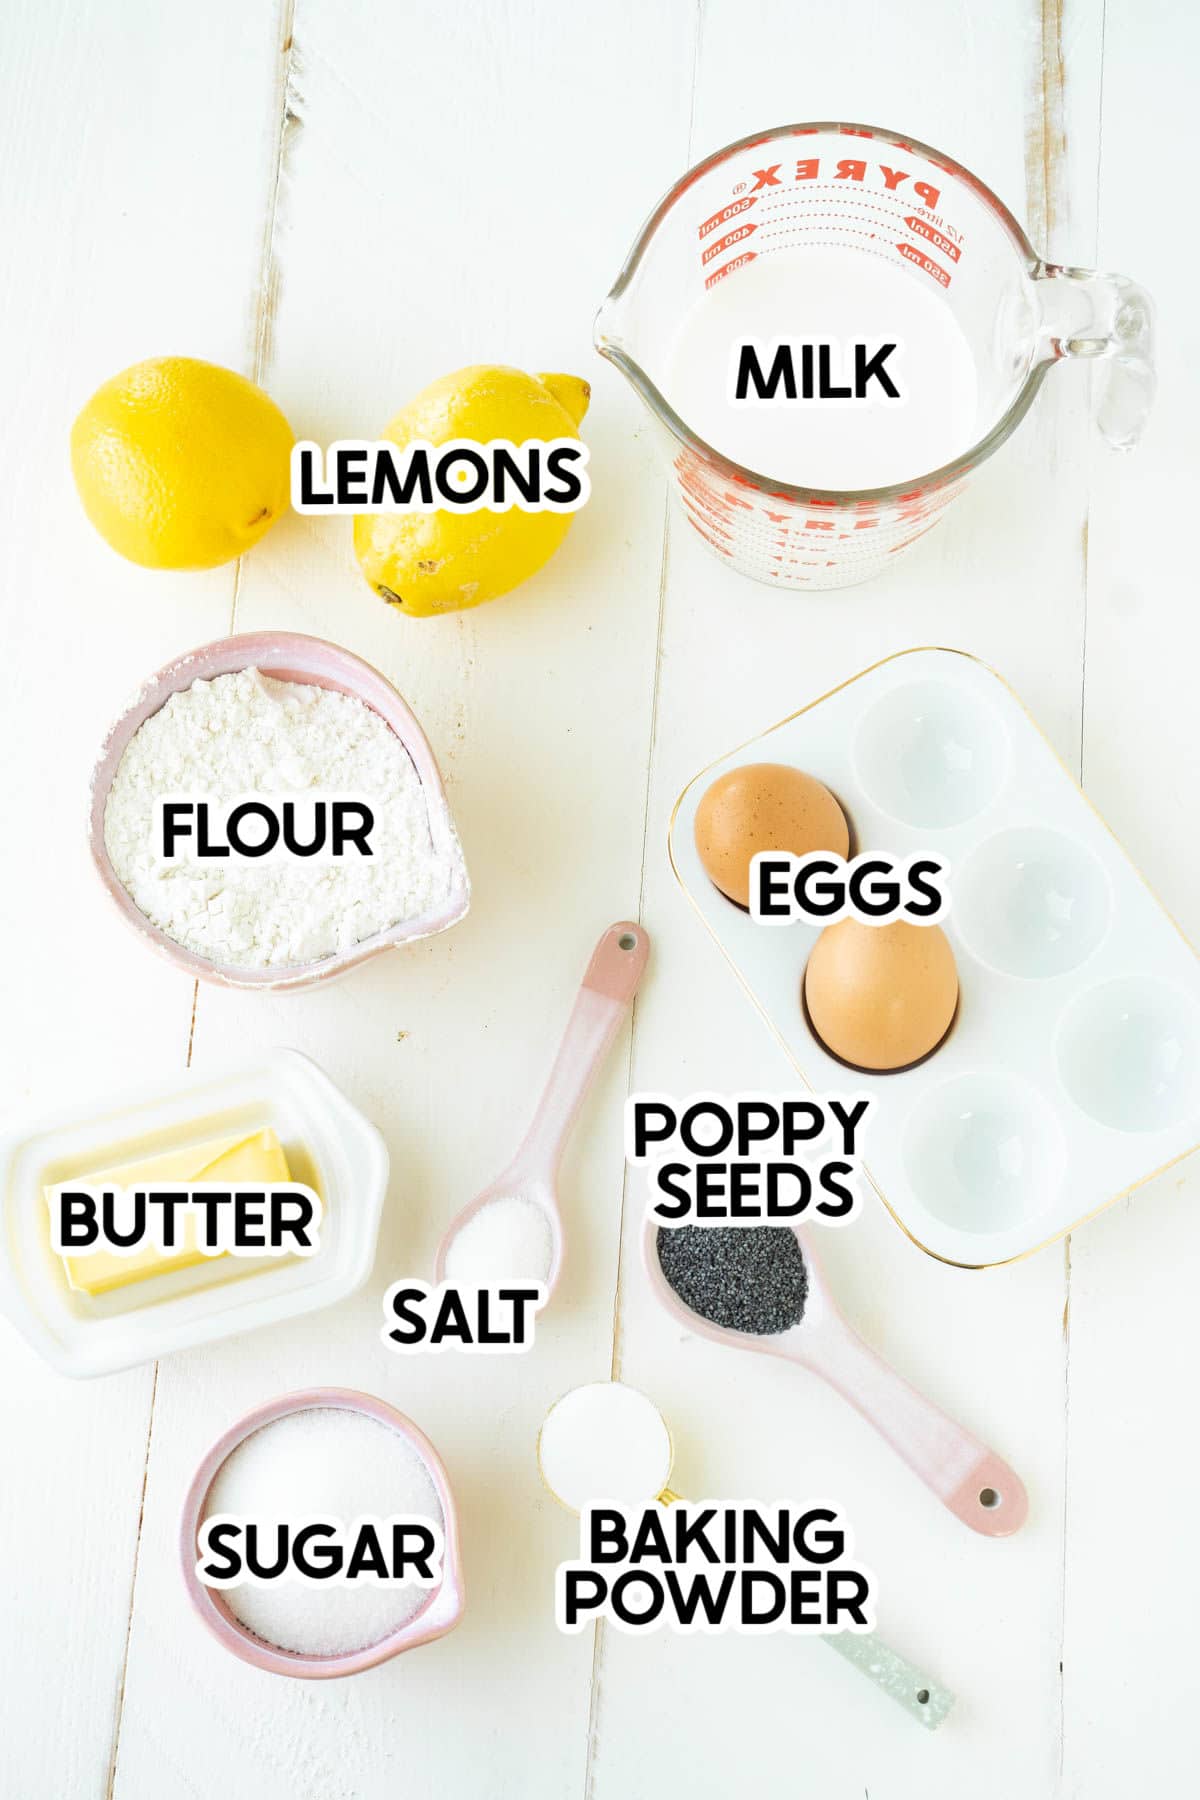 Ingredients needed for lemon poppy seed with labels